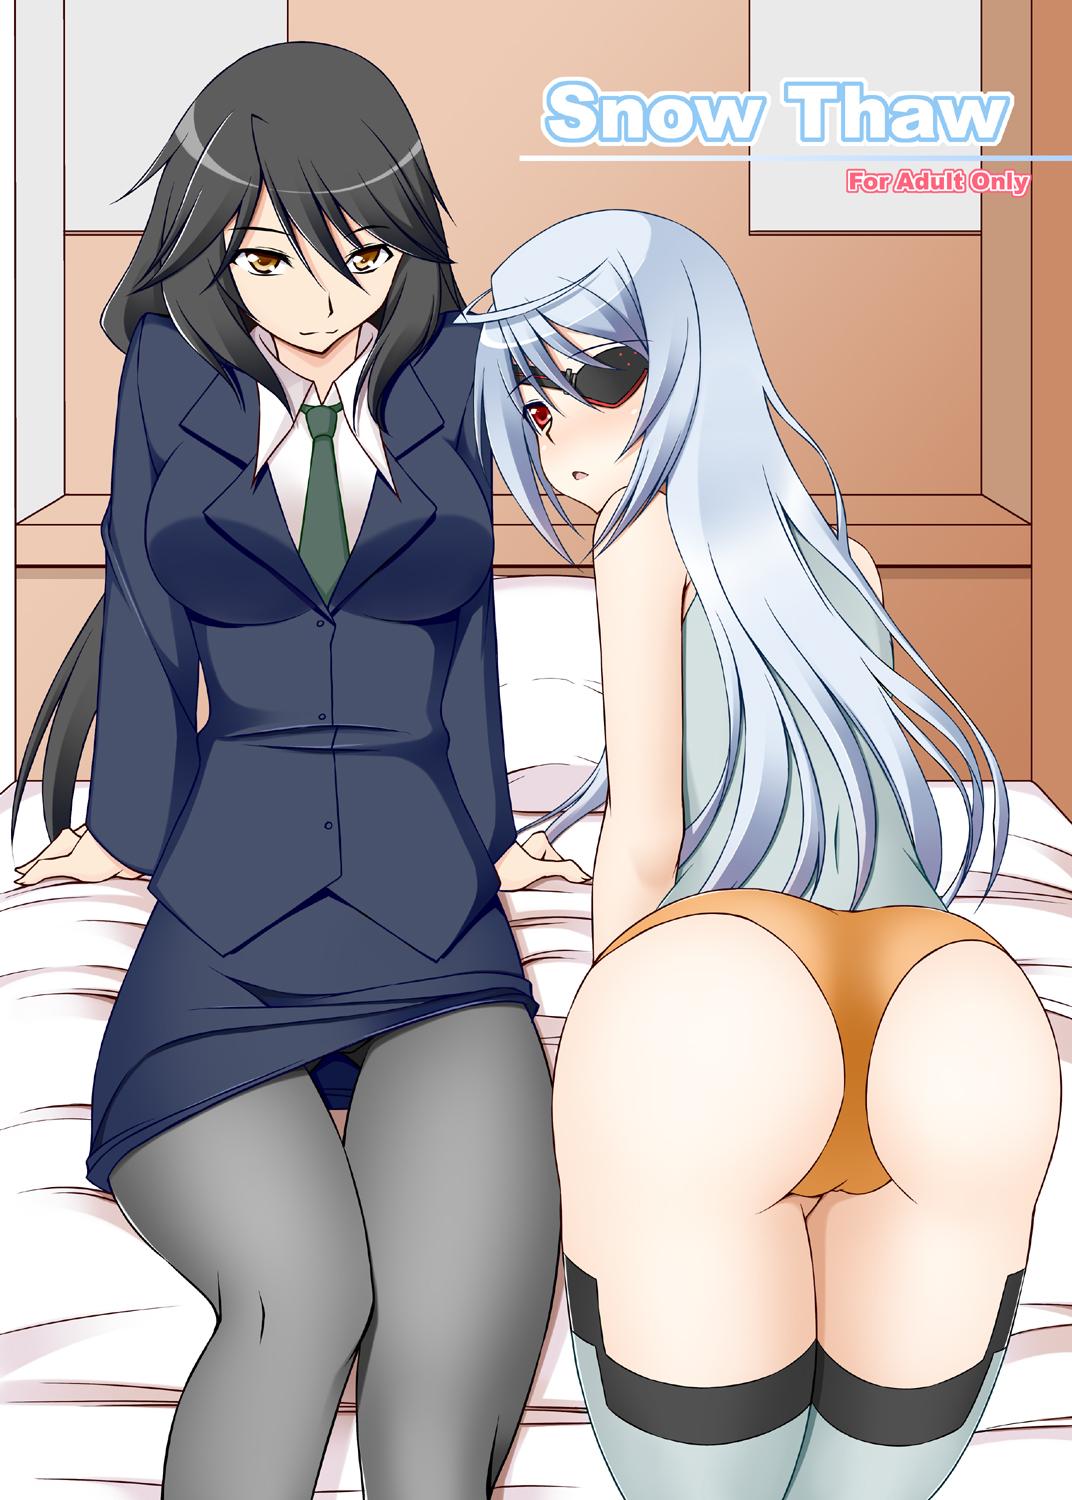 Butt Sex Snow Thaw - Infinite stratos Jerkoff - Picture 1